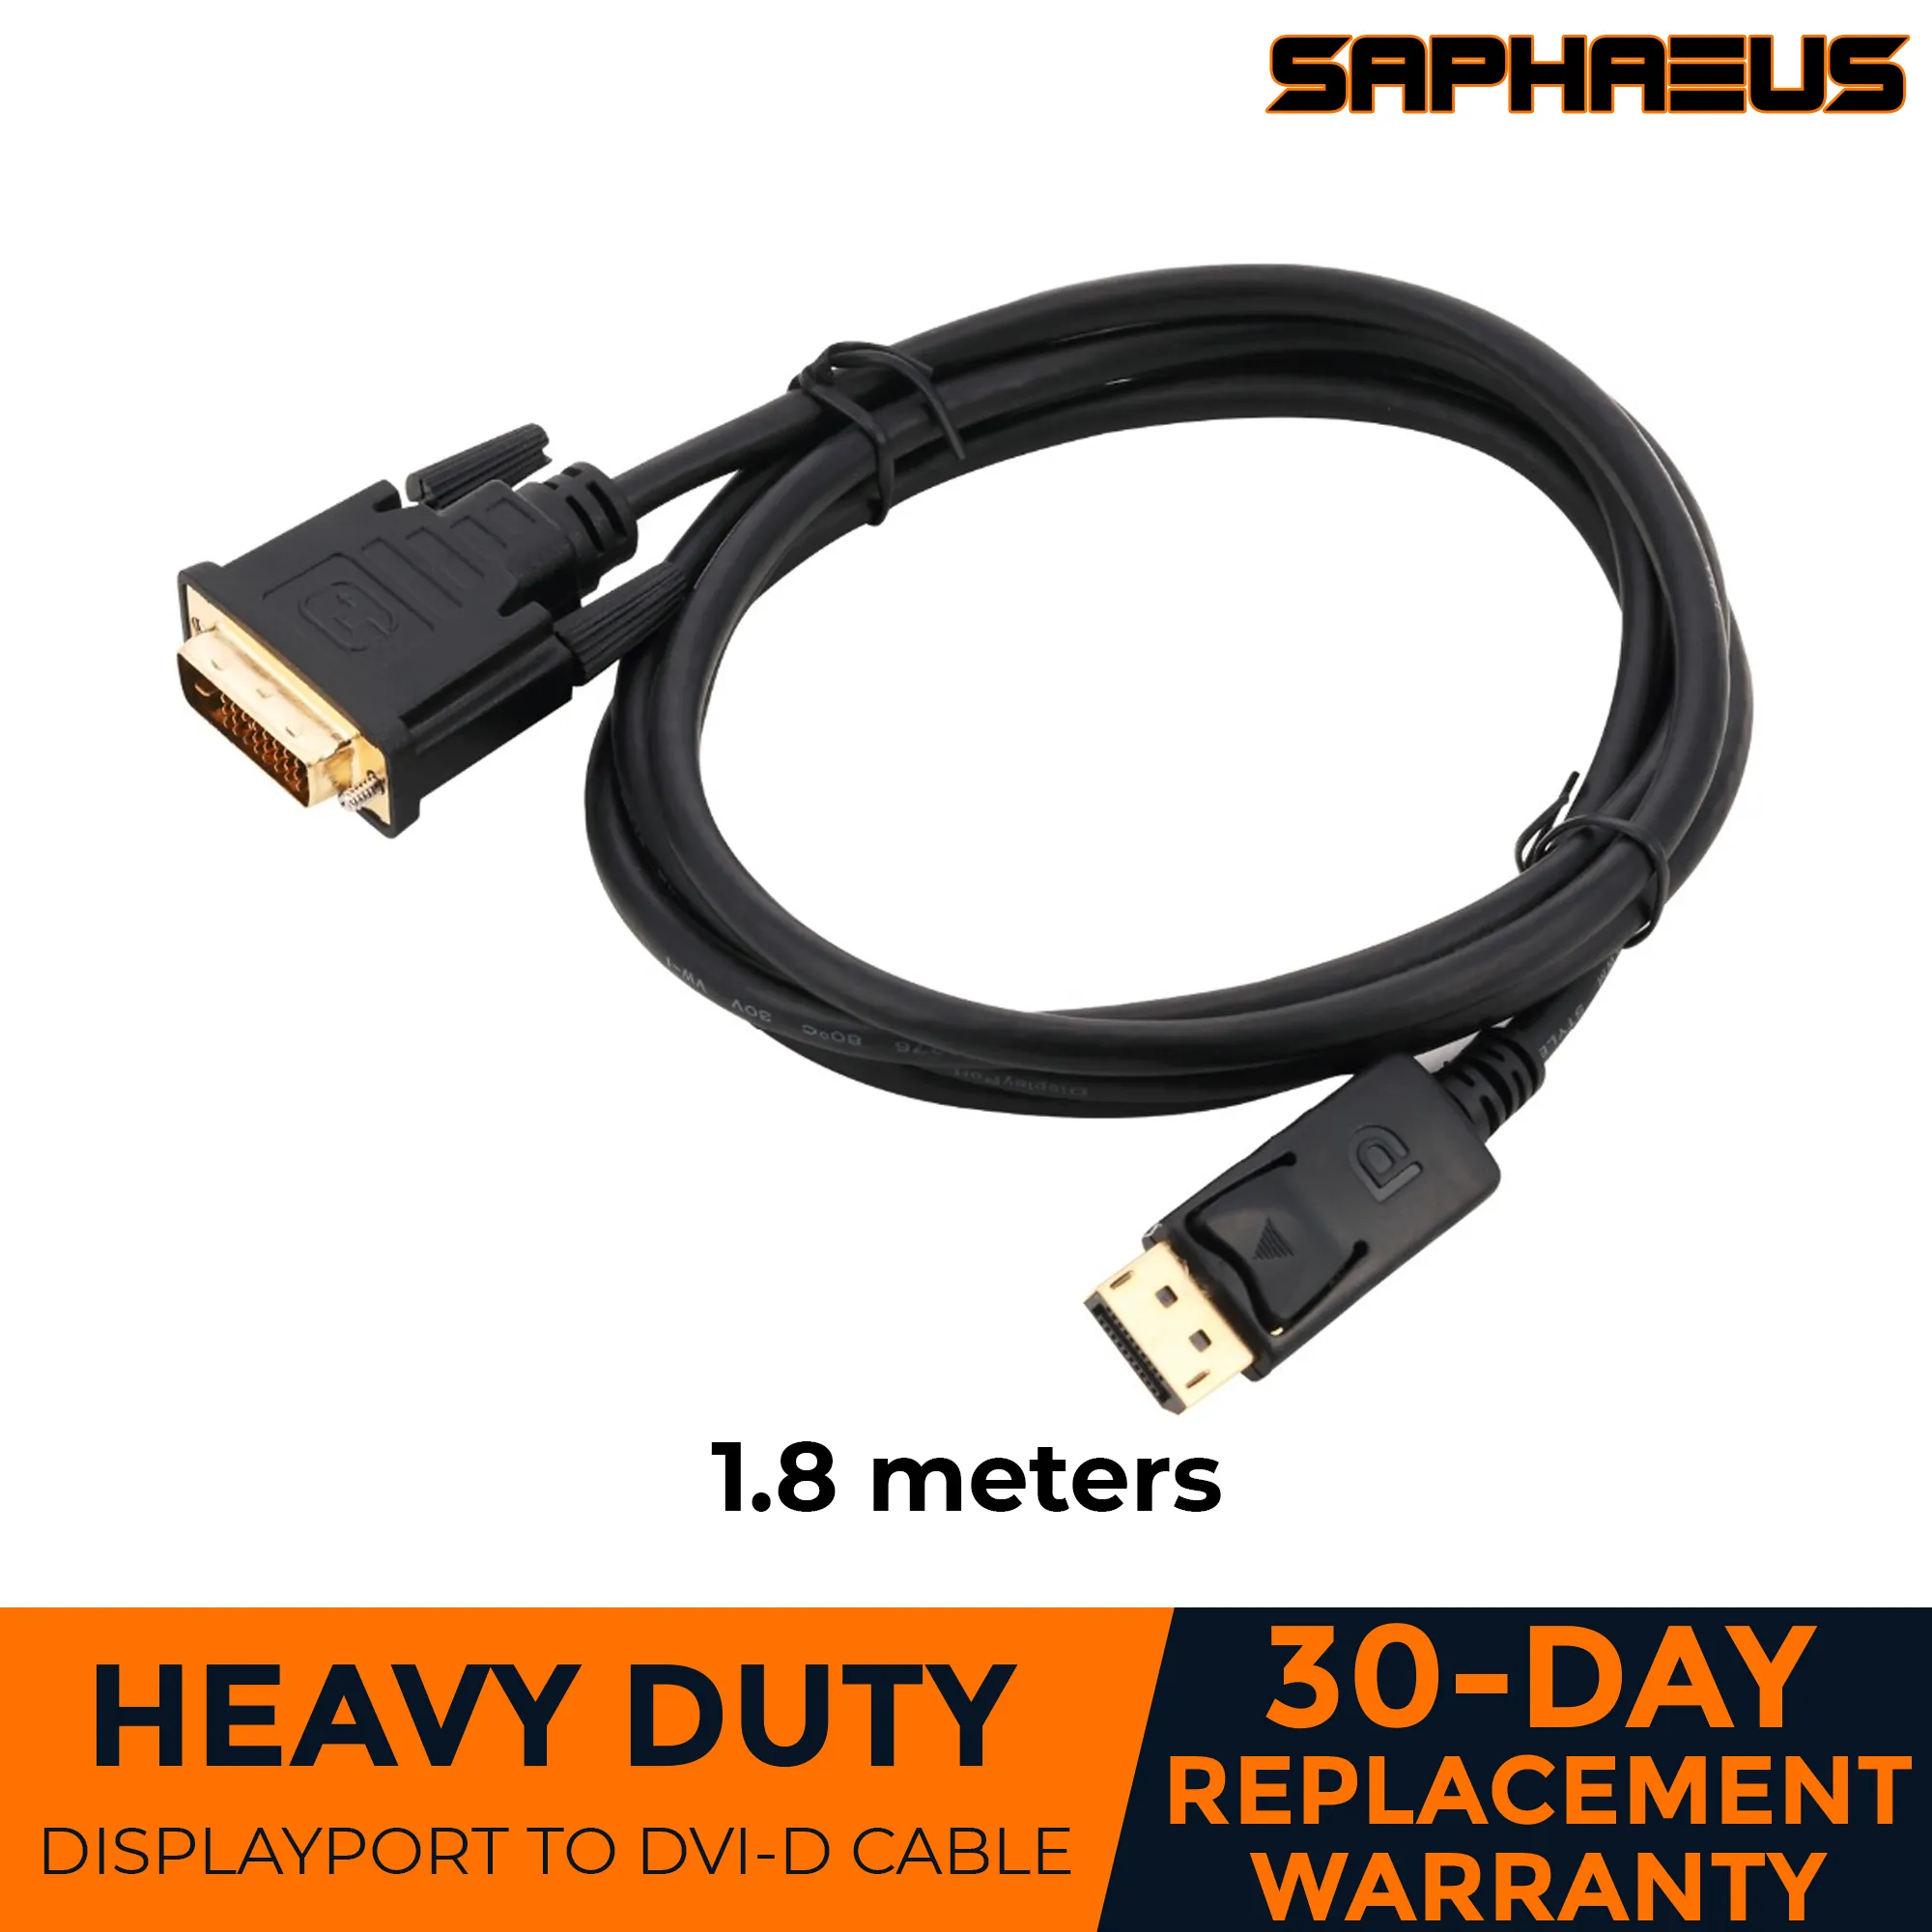 Displayport To Dvi Cable Dp To Dvi D 24 1 Cable 1080p Dp Male To Dvi Male To Cable For Projector Monitor Dp To Dvi Cable Lazada Ph